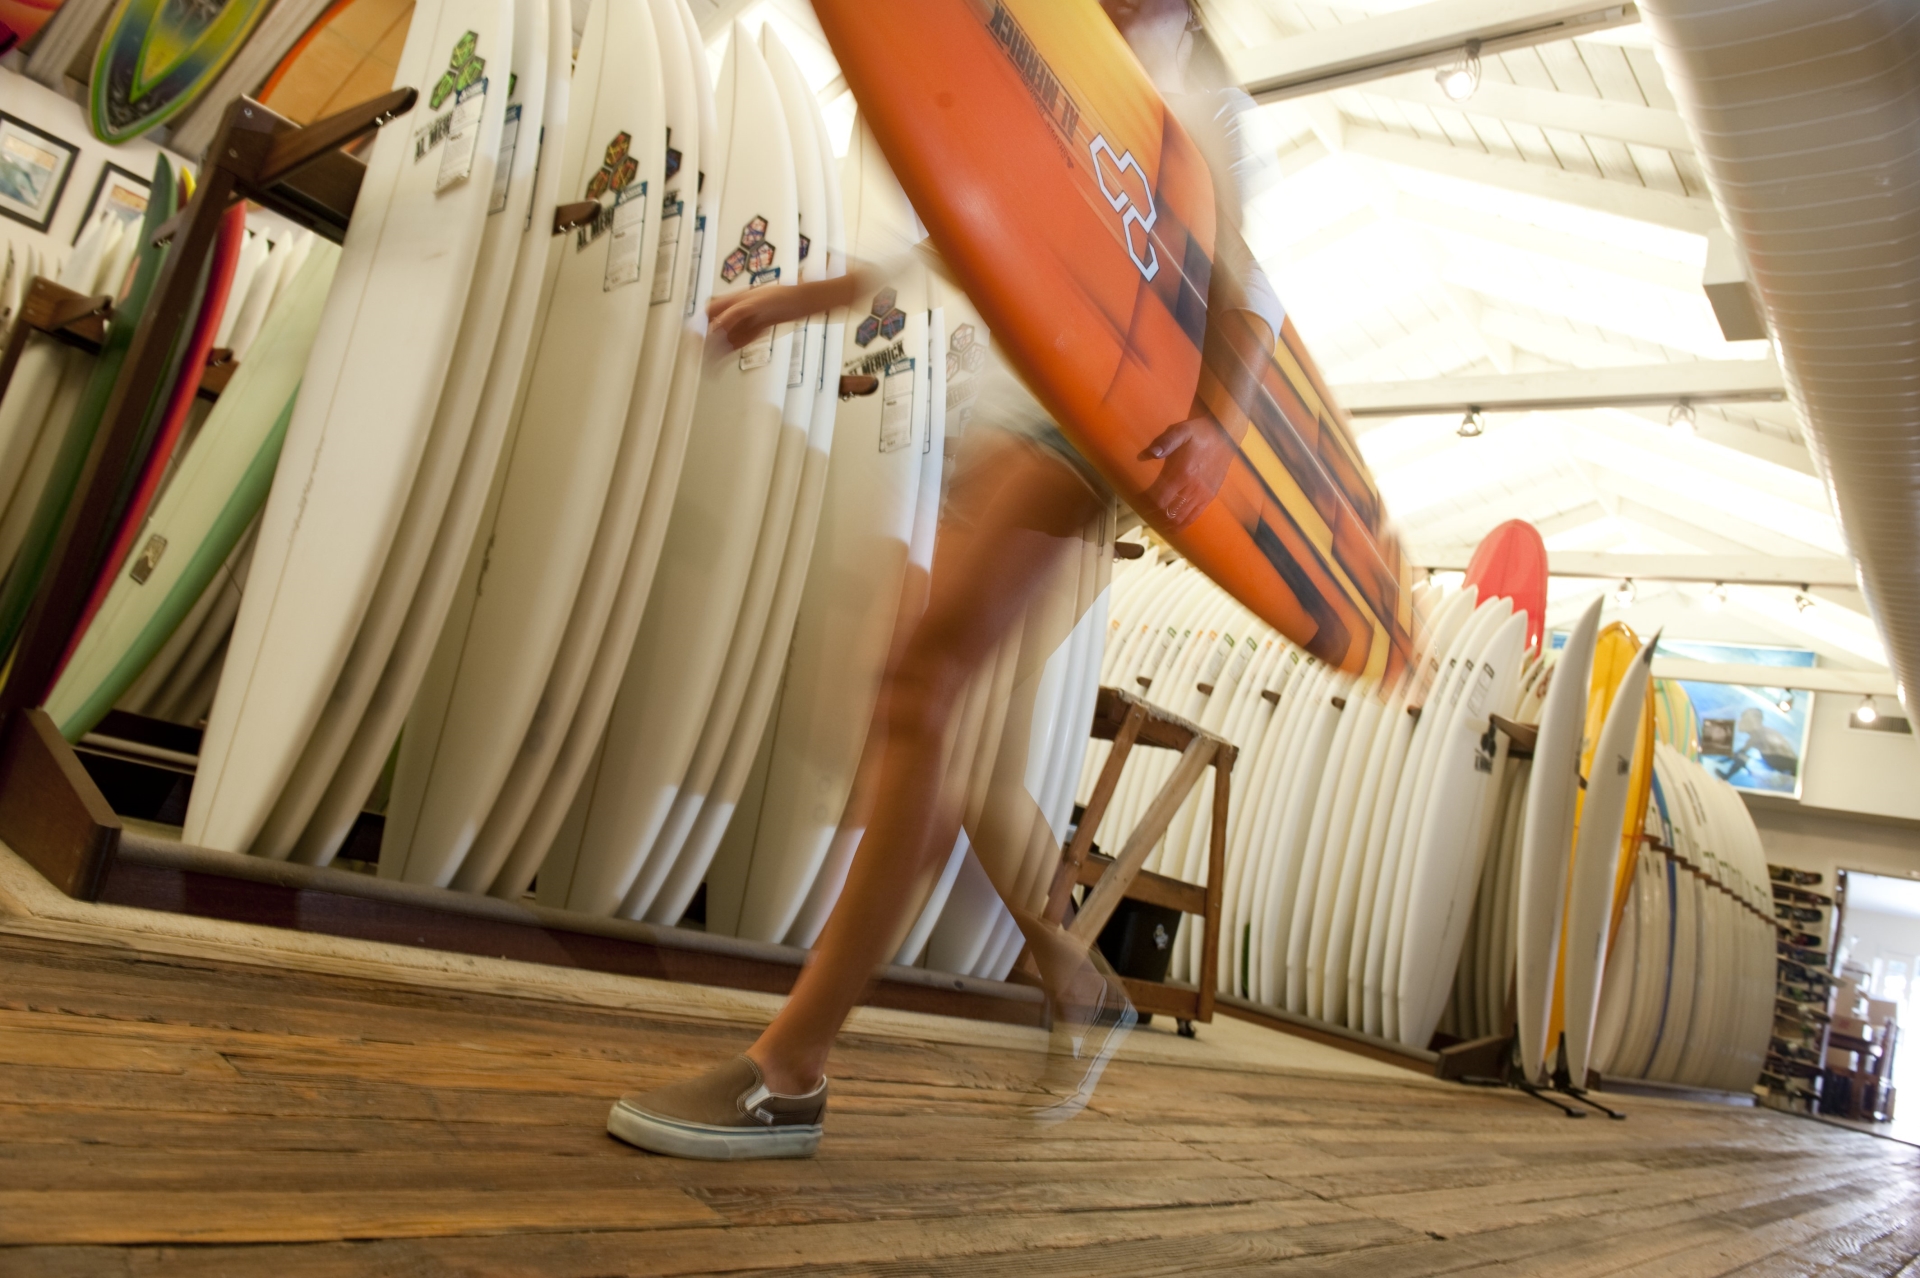 Go surfing in Newport - Southwest & Southern California for Families